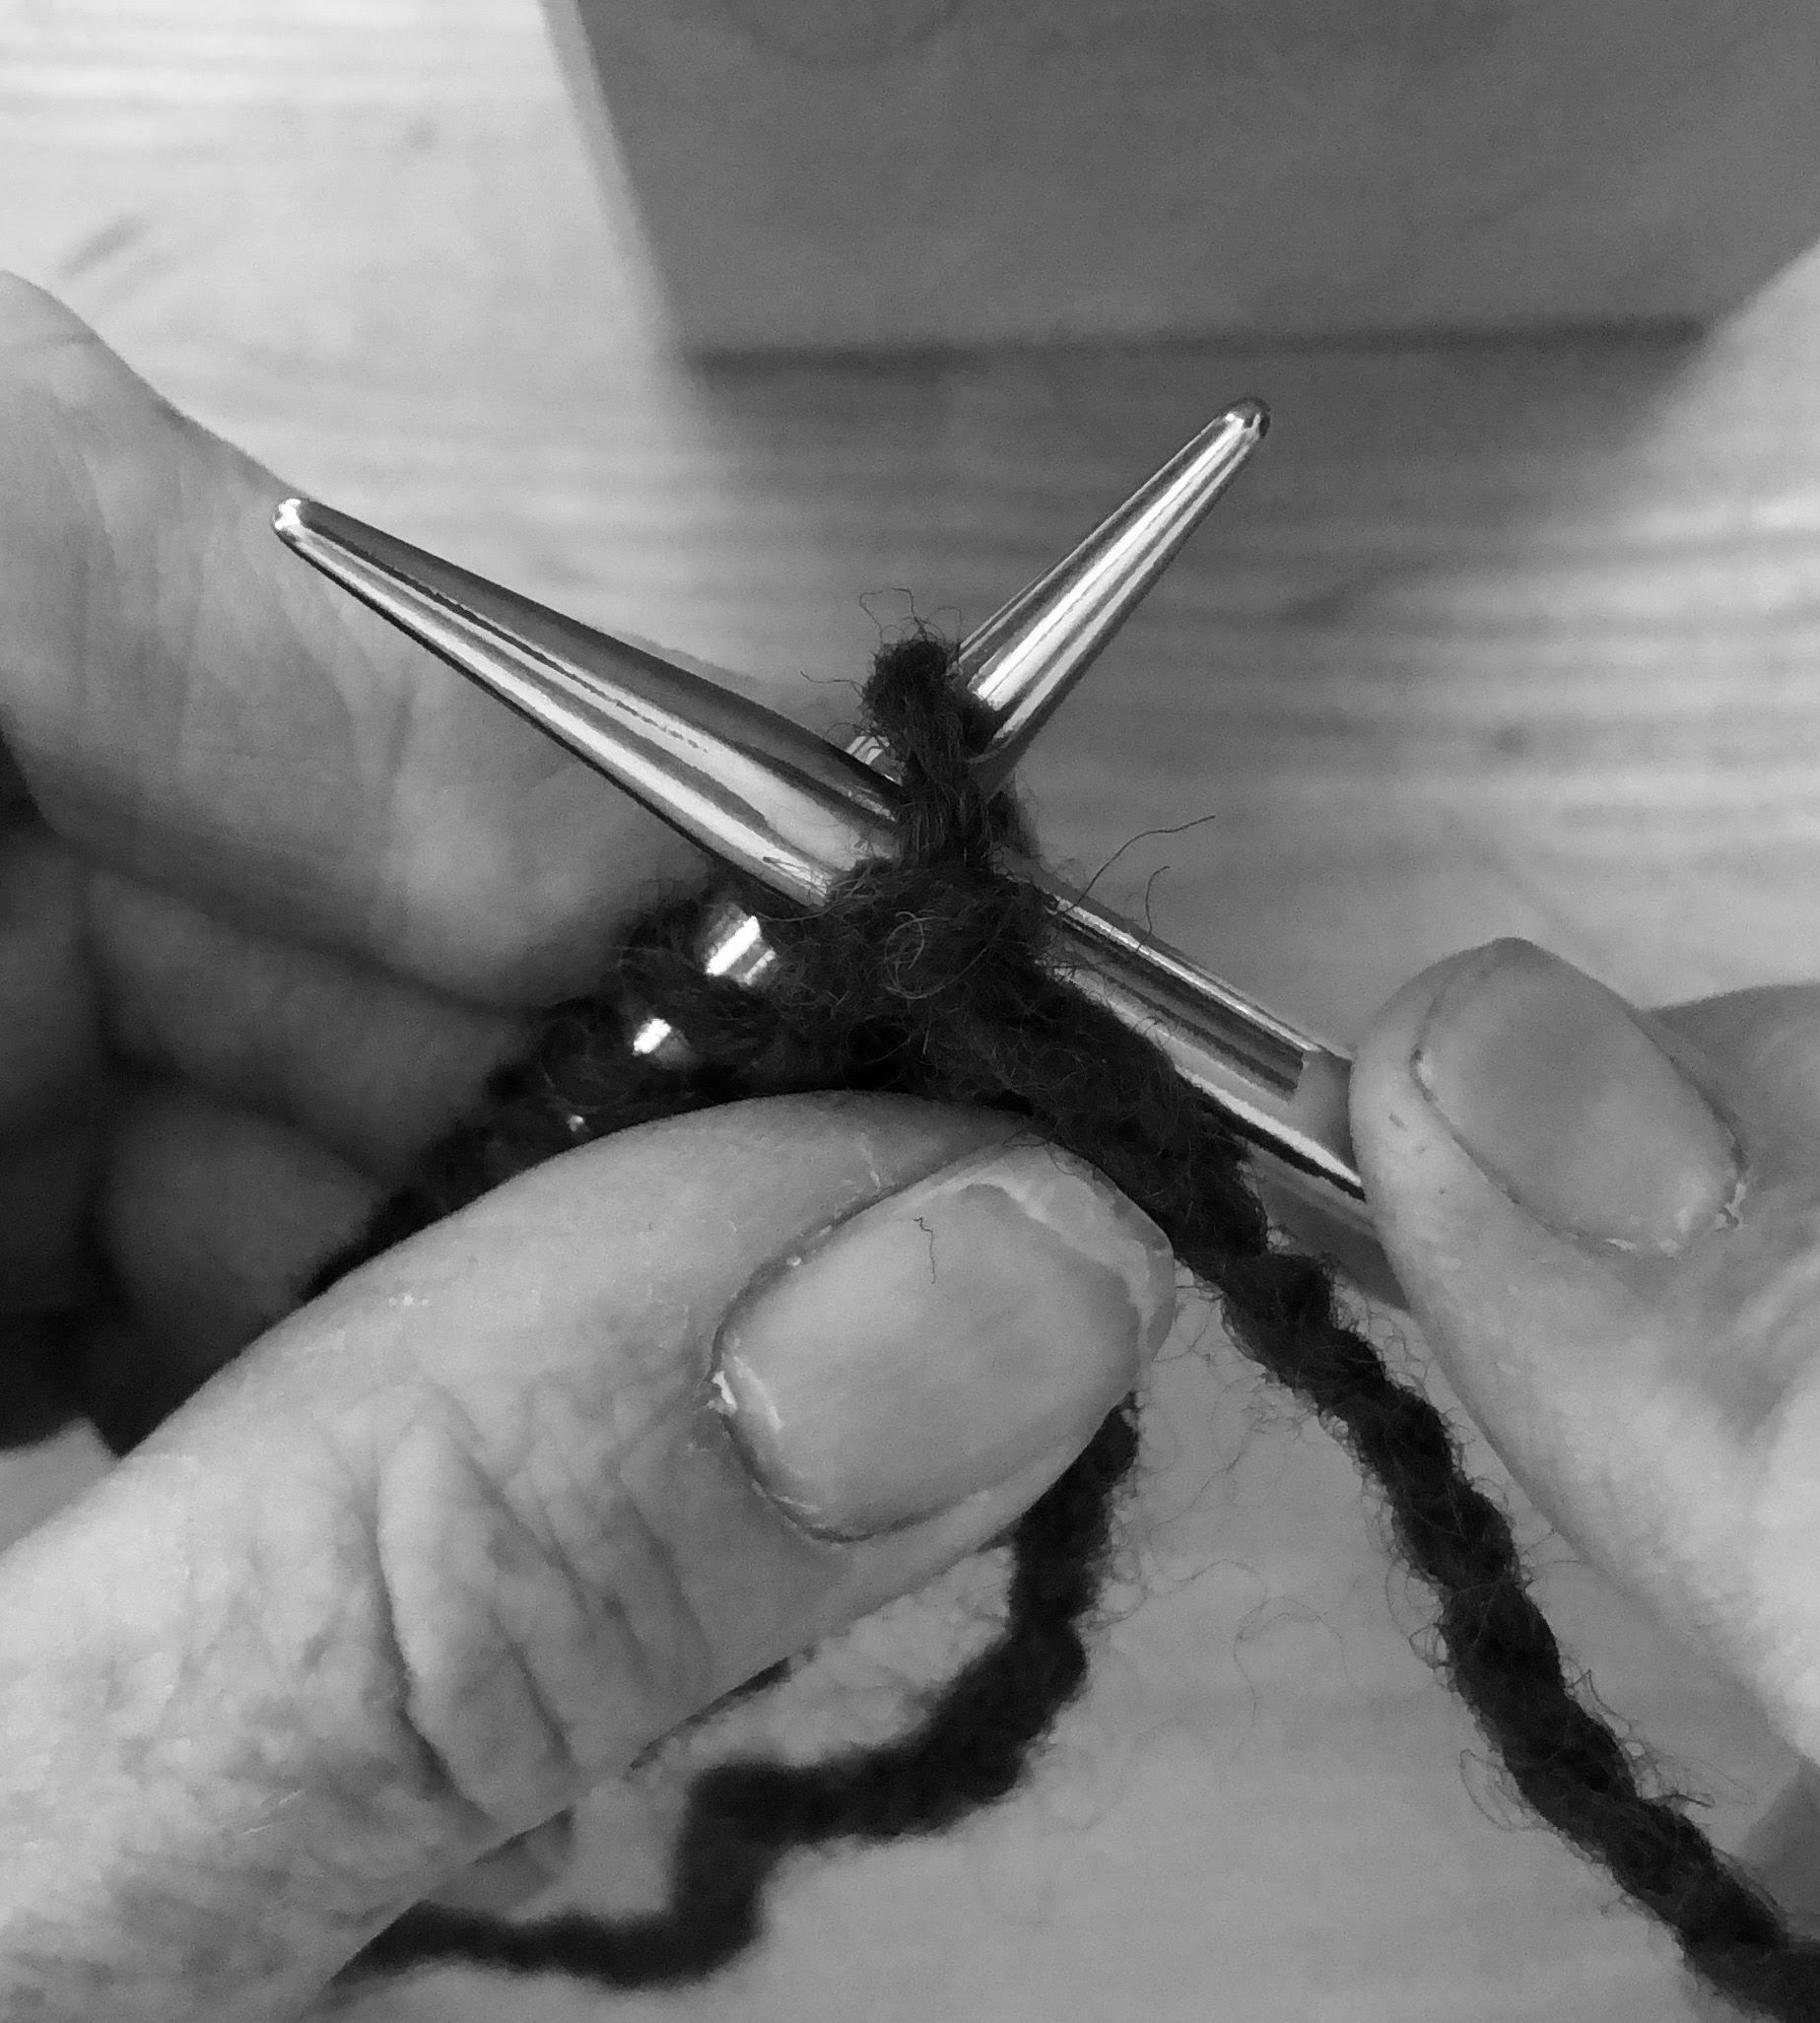 A black and white photo of a person holding a knitting needle.